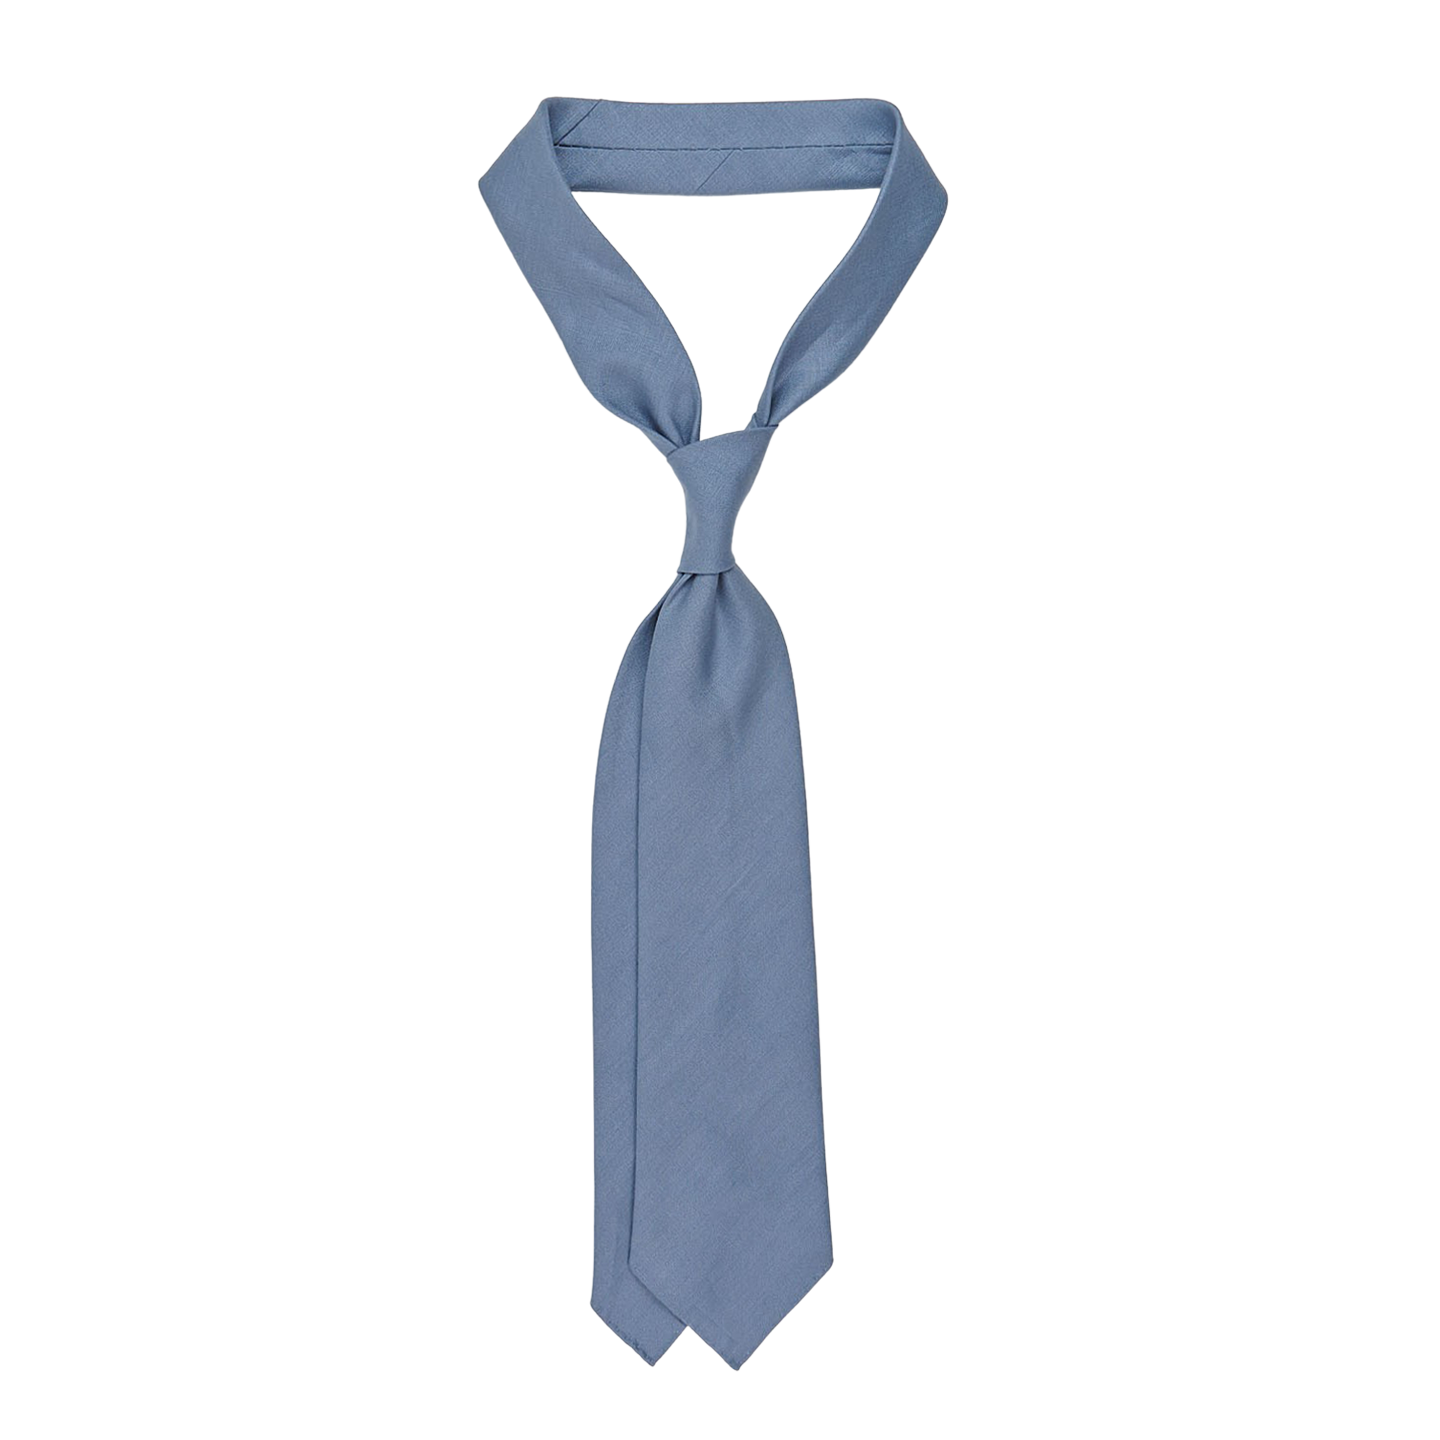 Dreaming of Monday Light Blue 7-Fold Vintage Linen Tie Feature